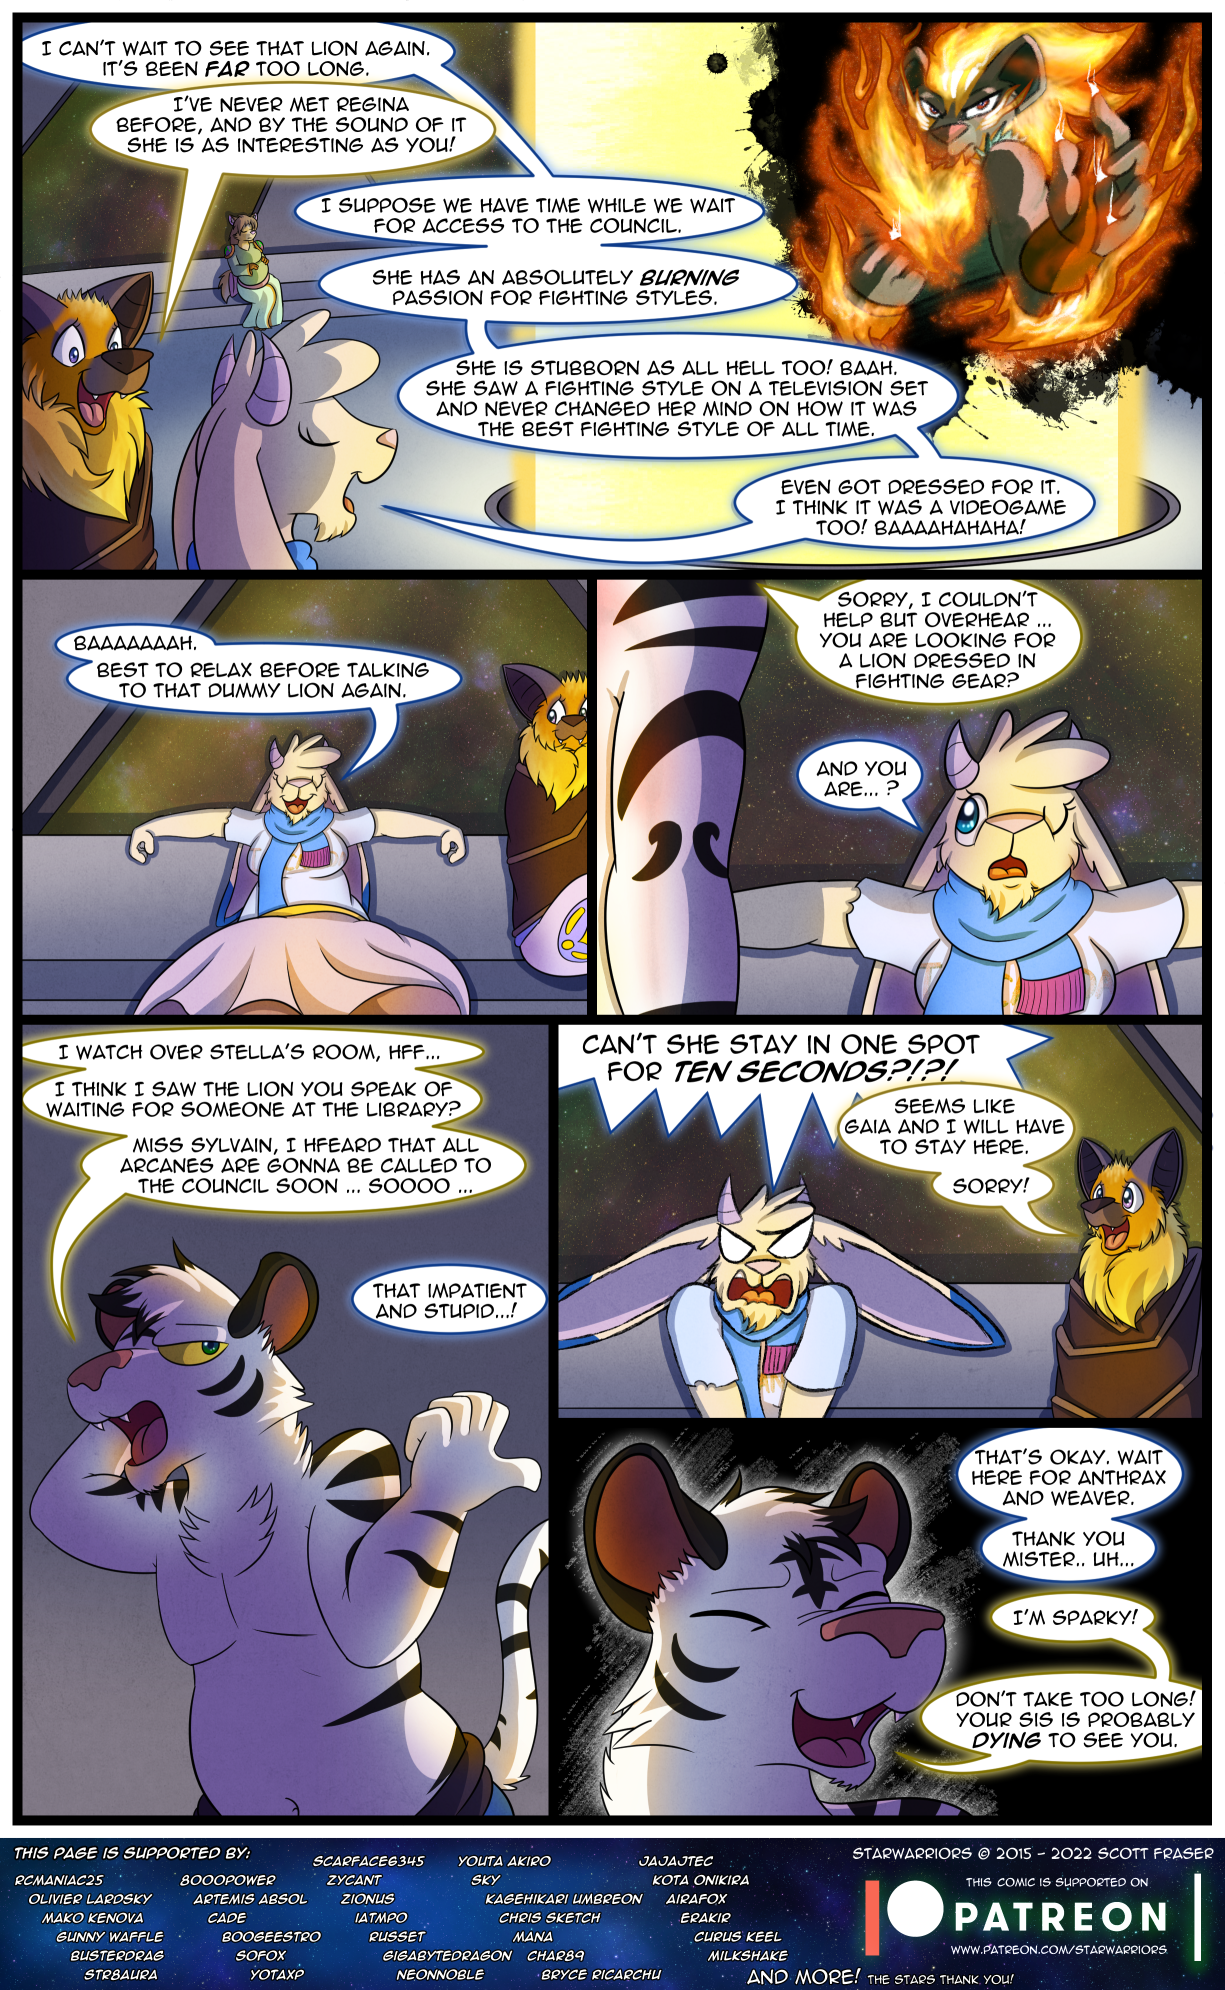 Ch6 Page 17 – On the move